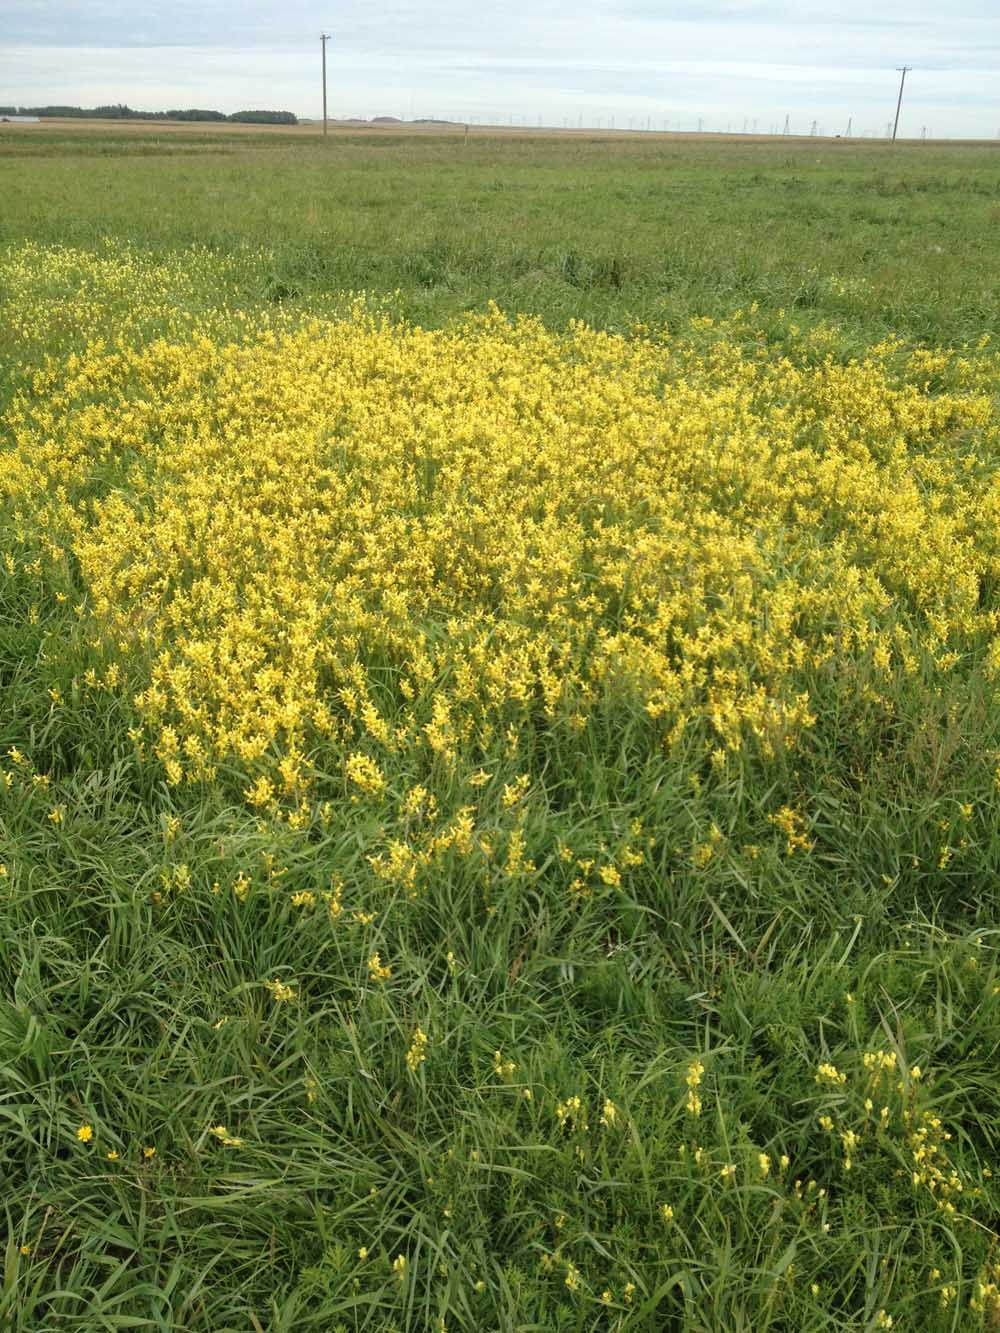 A field of yellow flowers in the middle of green grass.